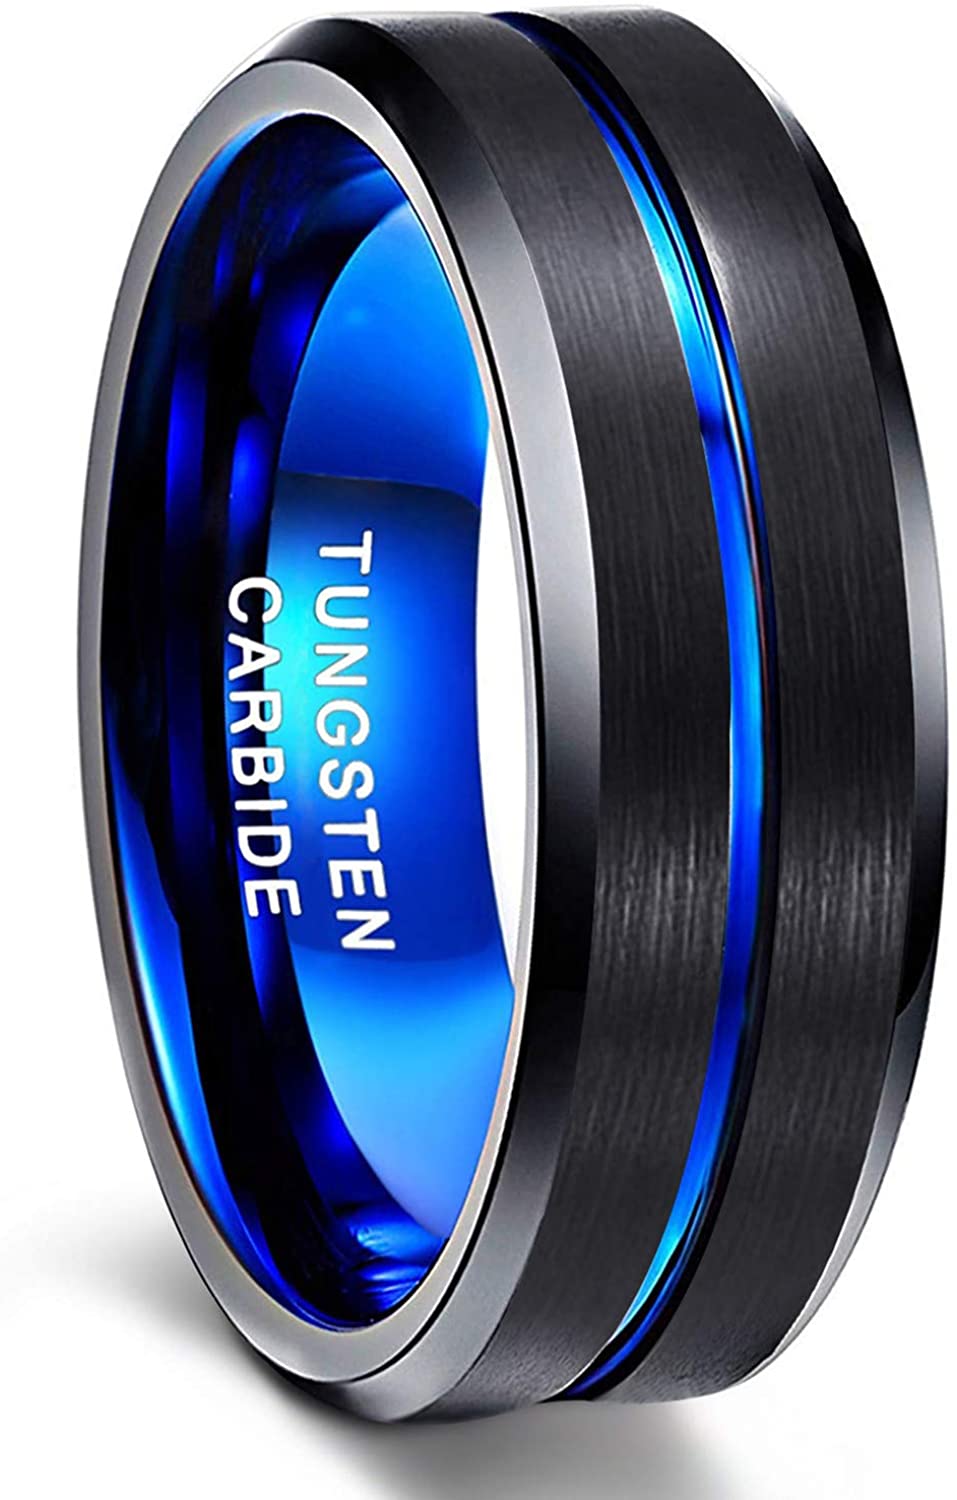 Greenpod Mens Tungsten Ring Wedding Band 8mm 10mm Engraved I Love You Thin  Blue/Rose Gold/Black Centre Groove Comfort Fit Size 6-17|Amazon.com